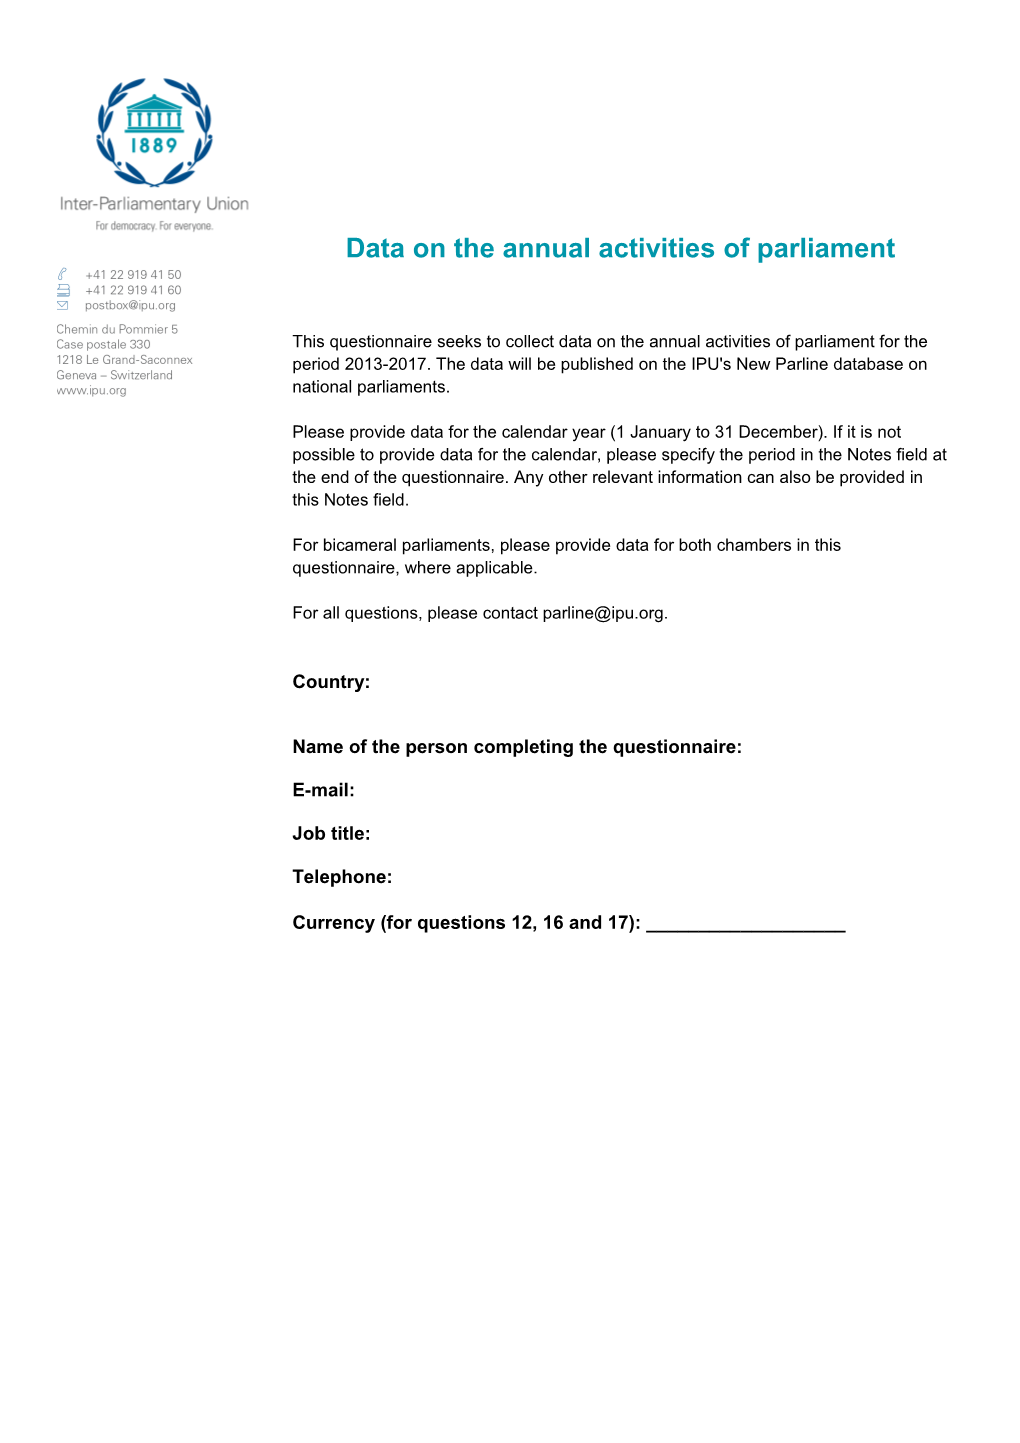 Data on the Annual Activities of Parliament